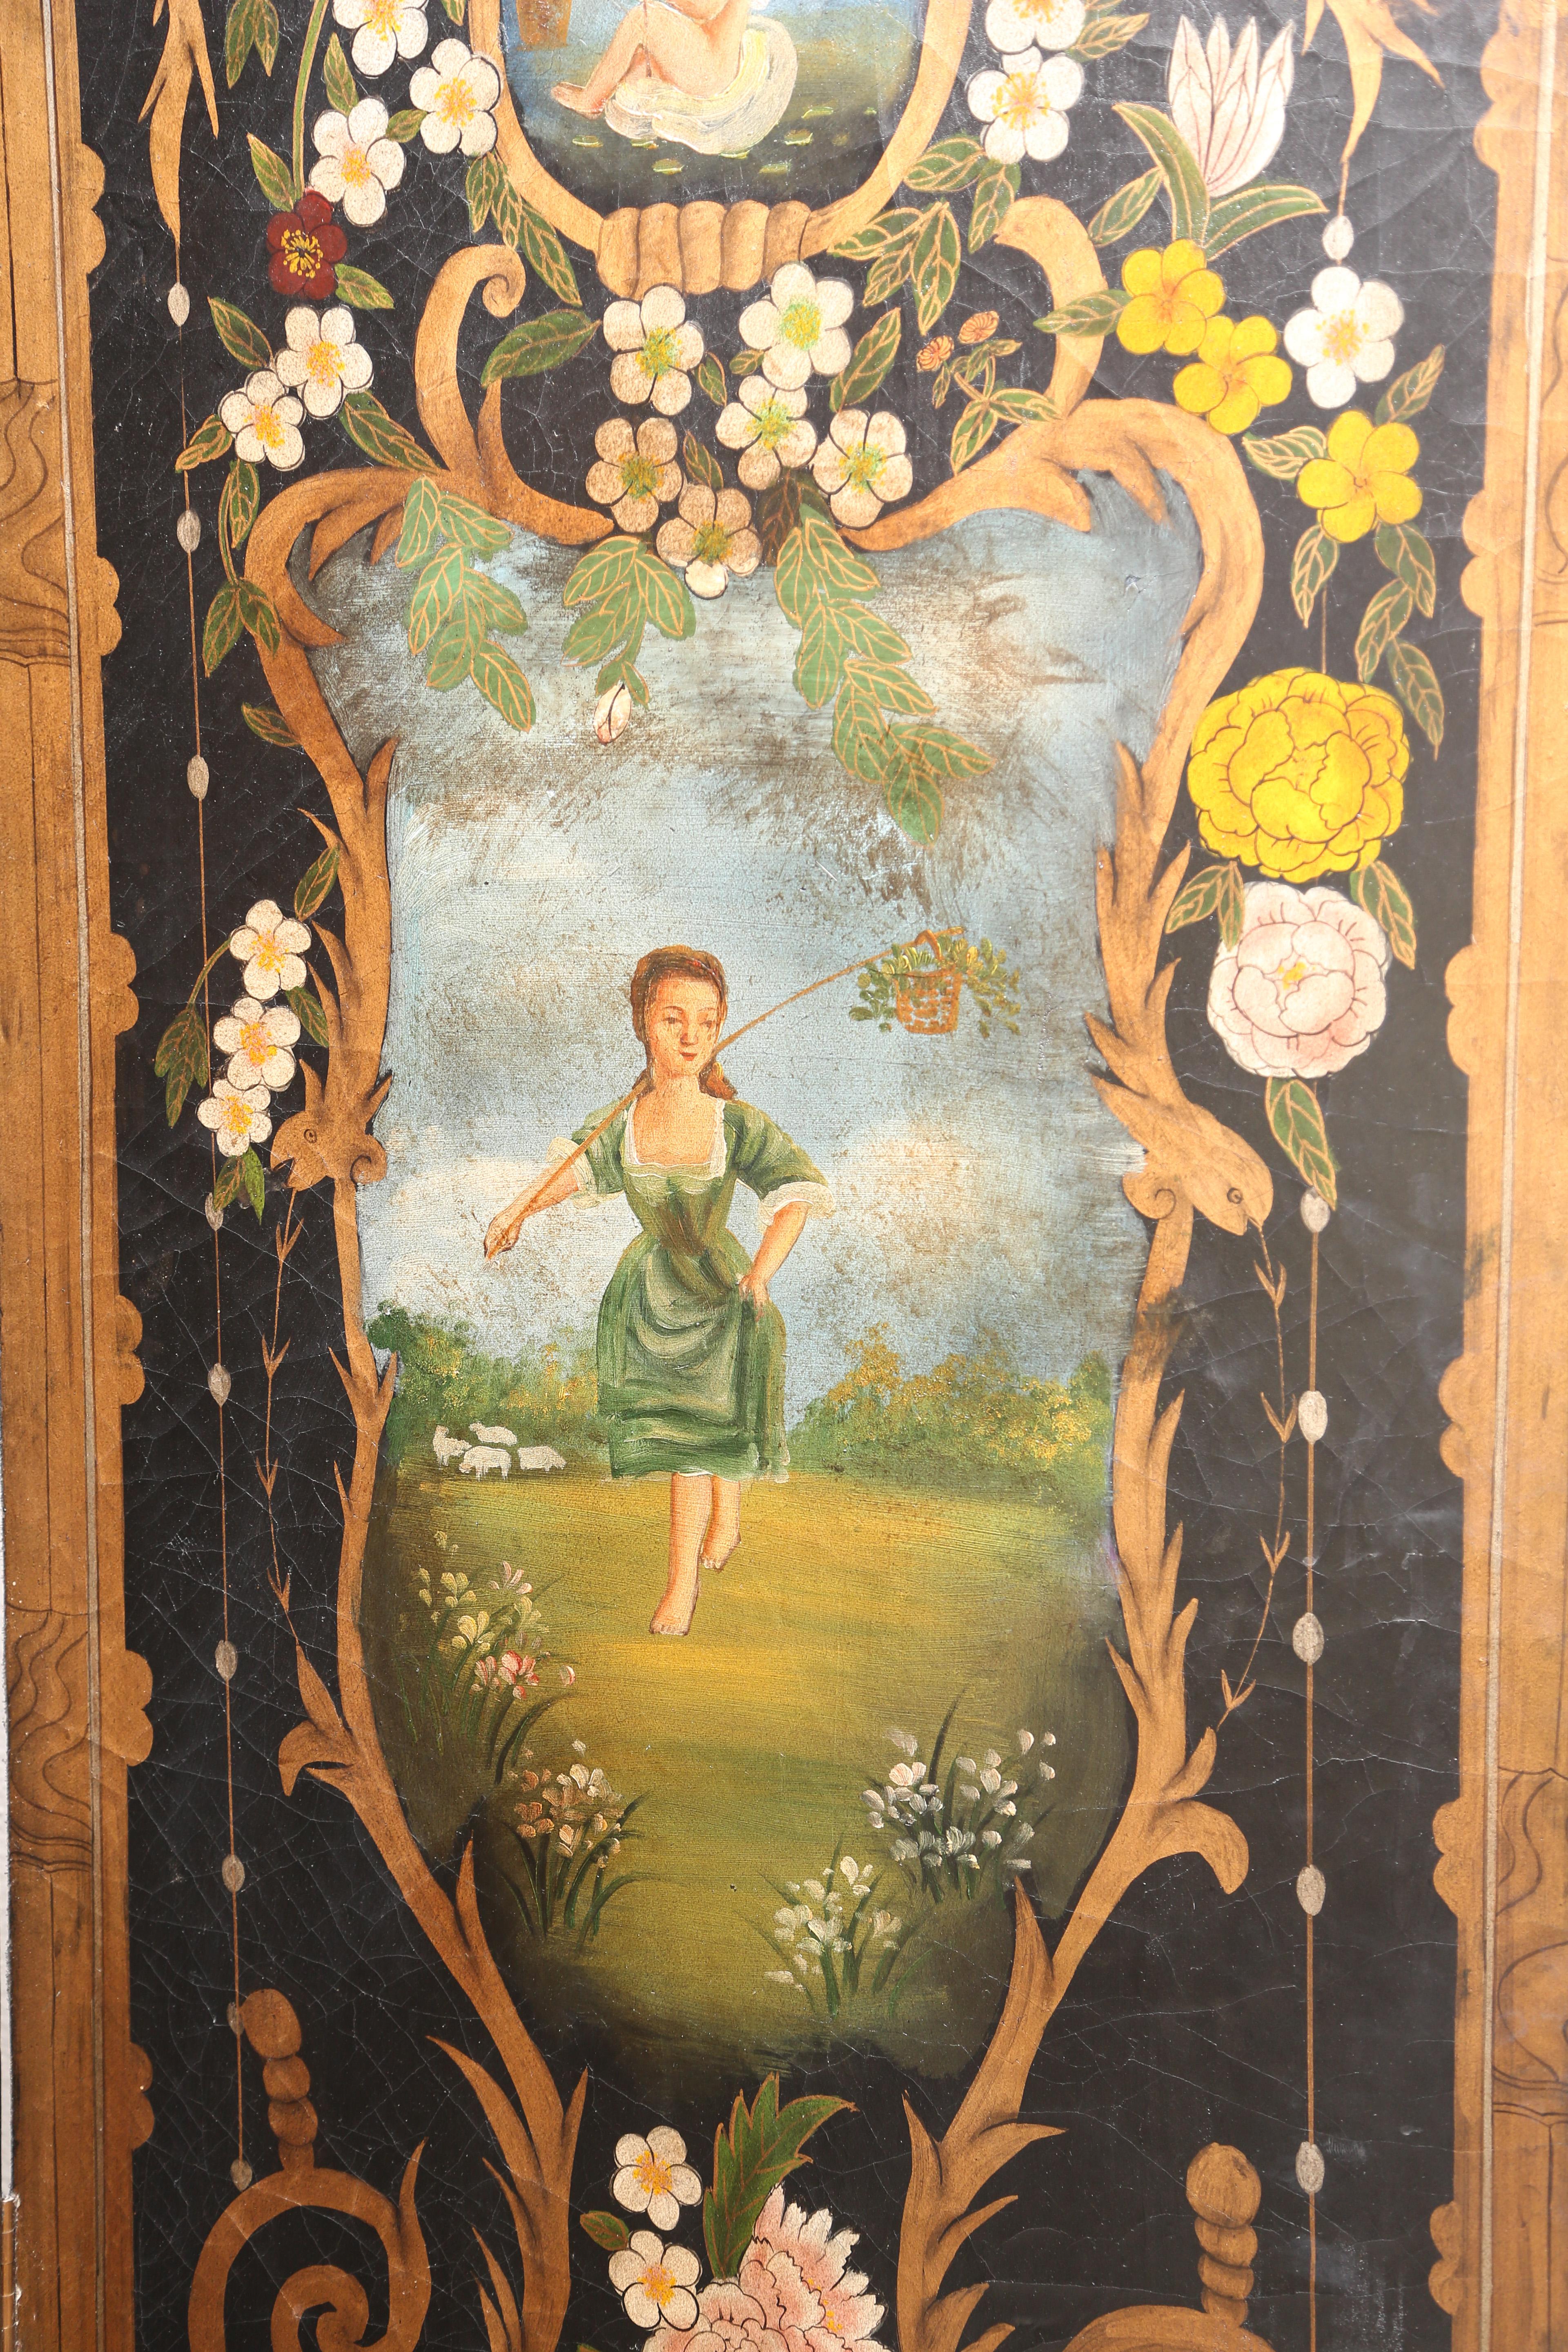 This is a superb hand painted 4-fold screen with very nice romantic scenes standing 7 ft tall and each panel is 20 inches. The back is gold. It's in good condition, not really sure where it was made maybe Italy.